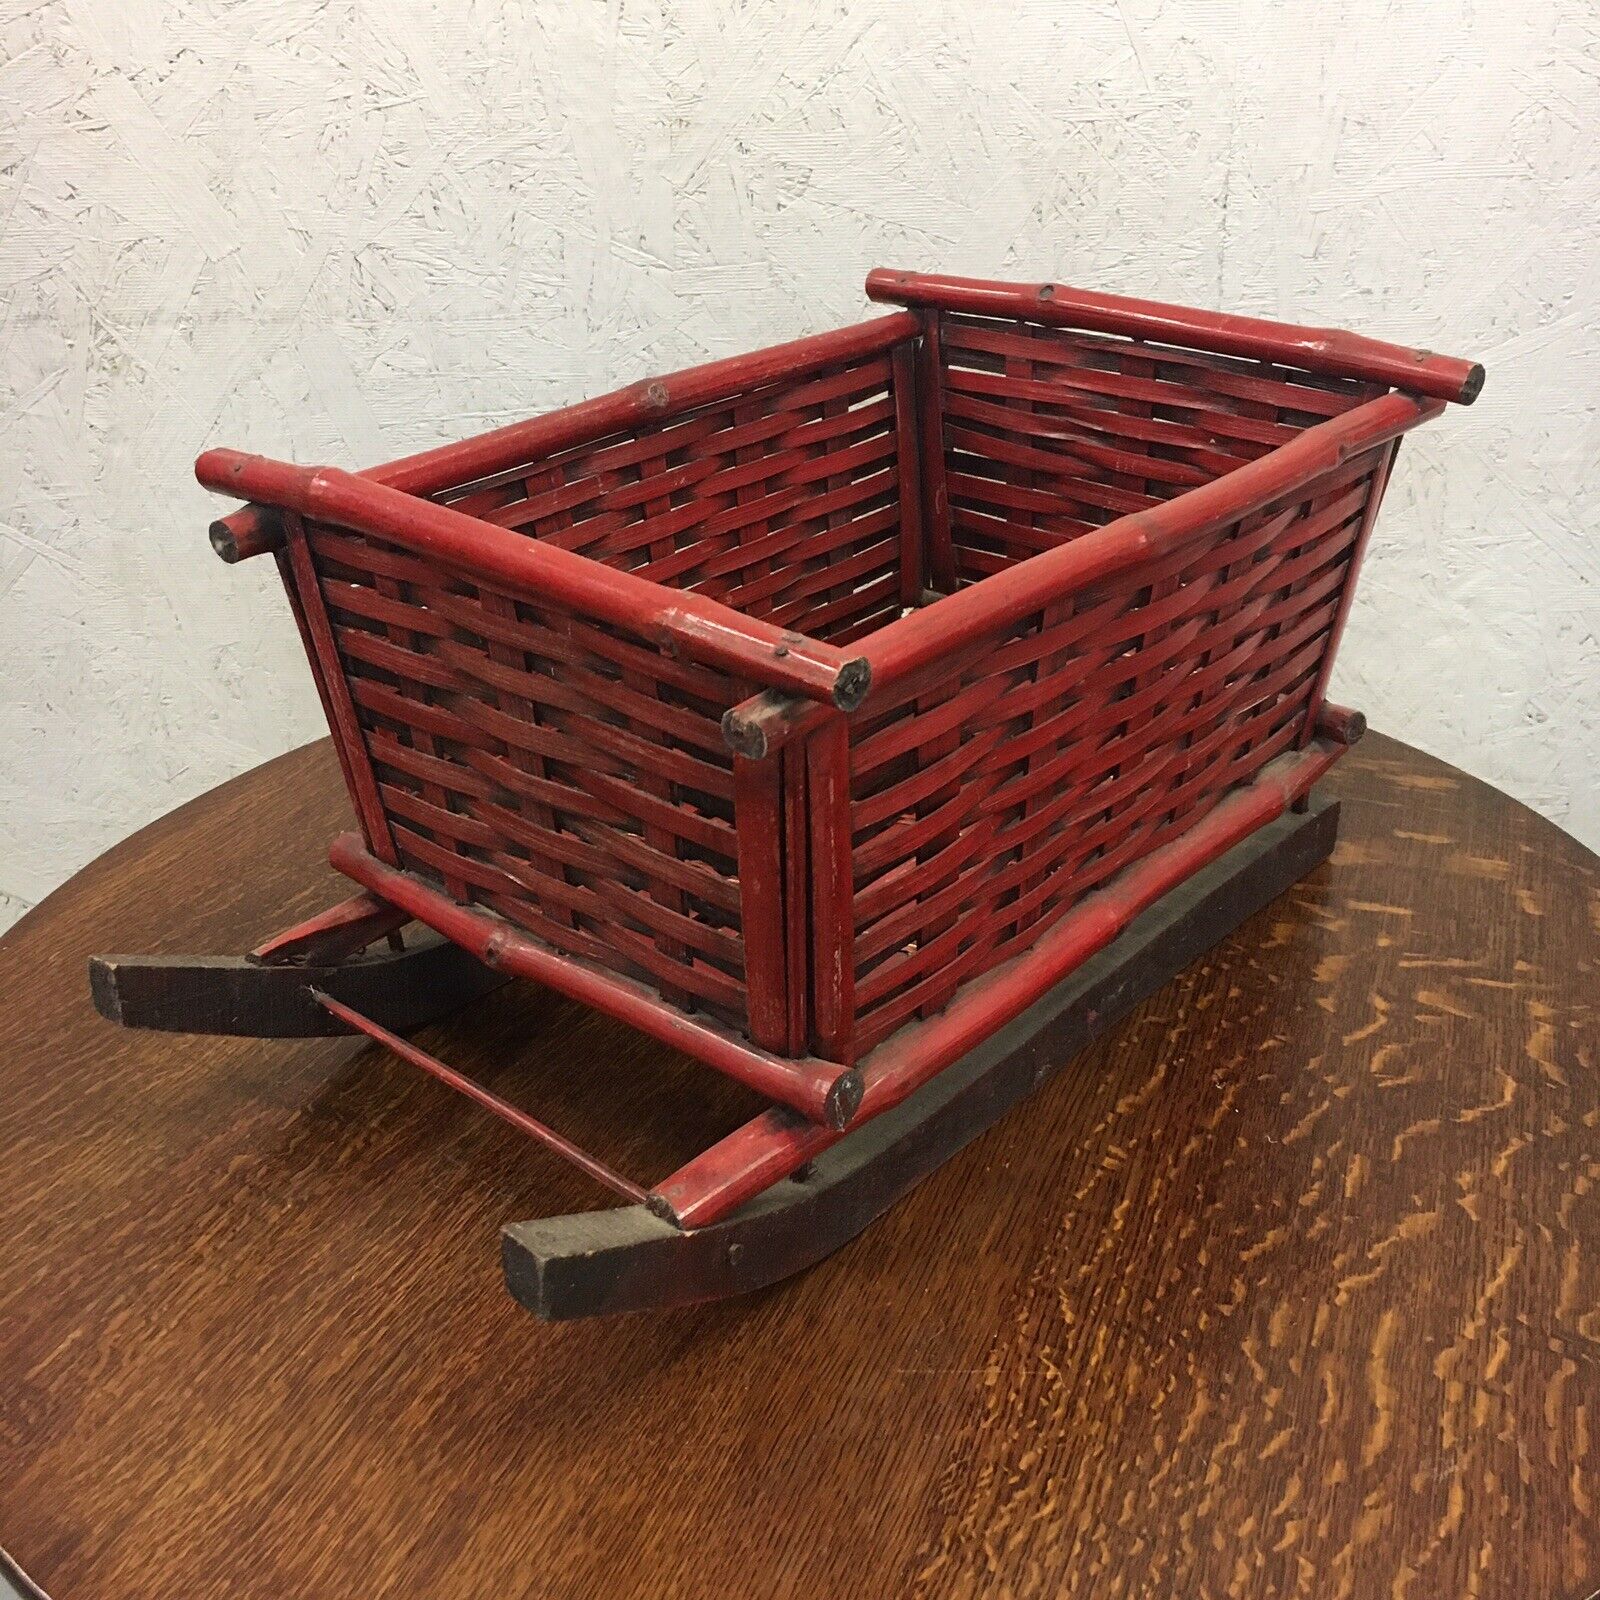 Vintage Red Bamboo Sleigh Christmas Wood Skates Woven Basket Wicker Decorative 